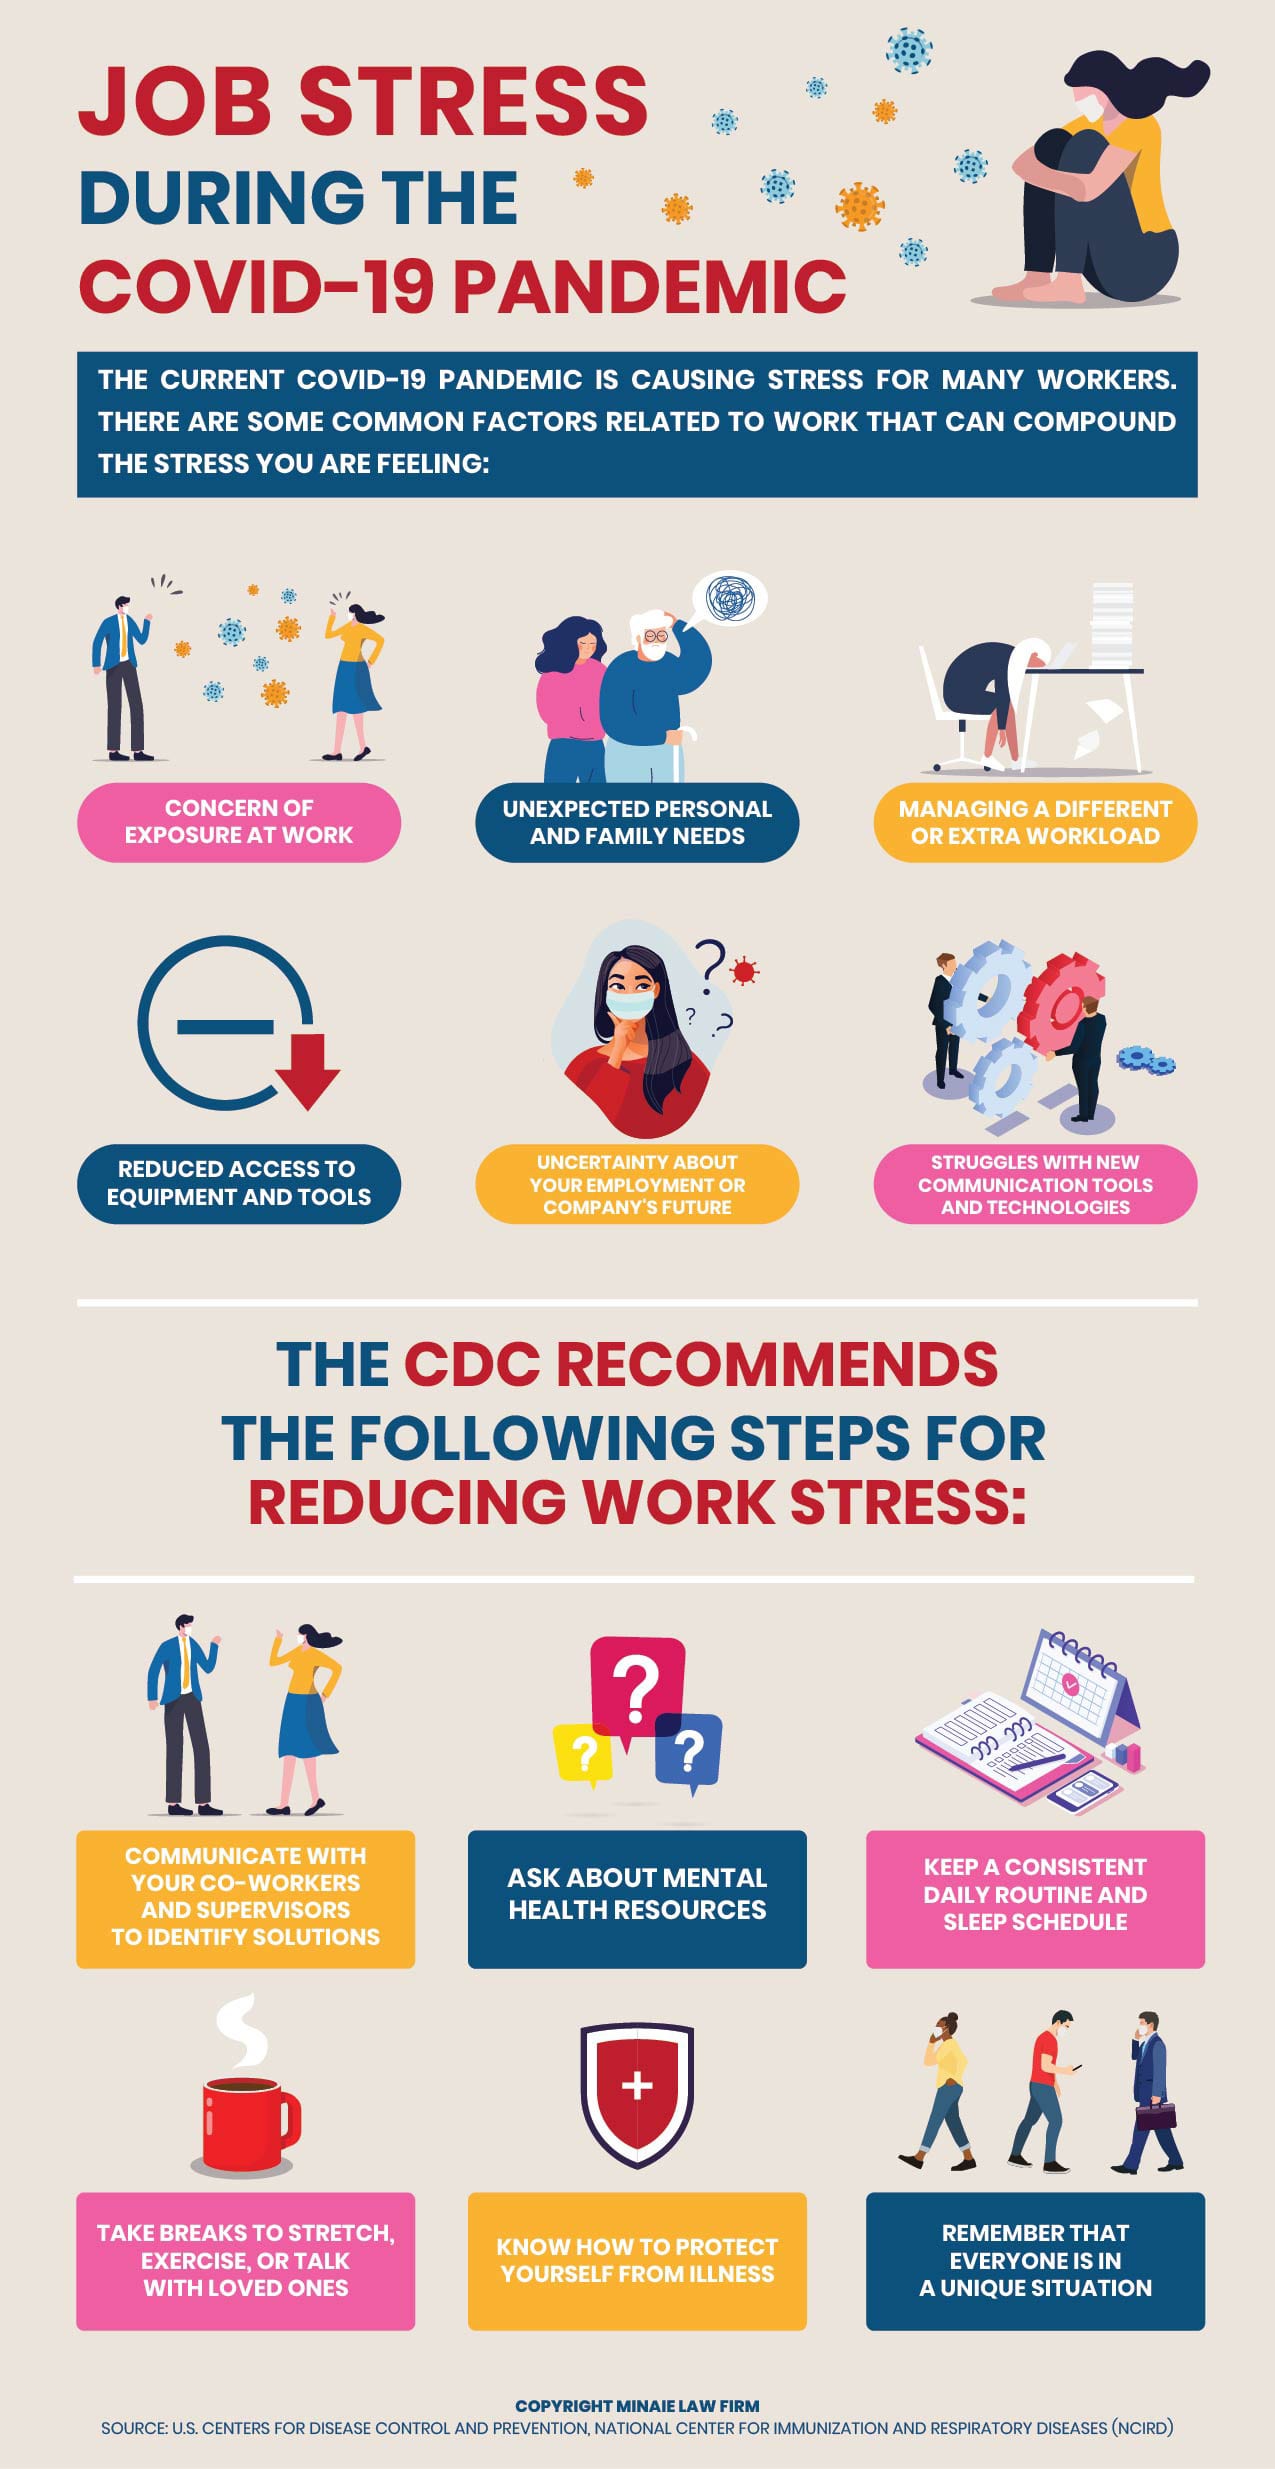 covid-19 stress at work - an infographic showing common stressors